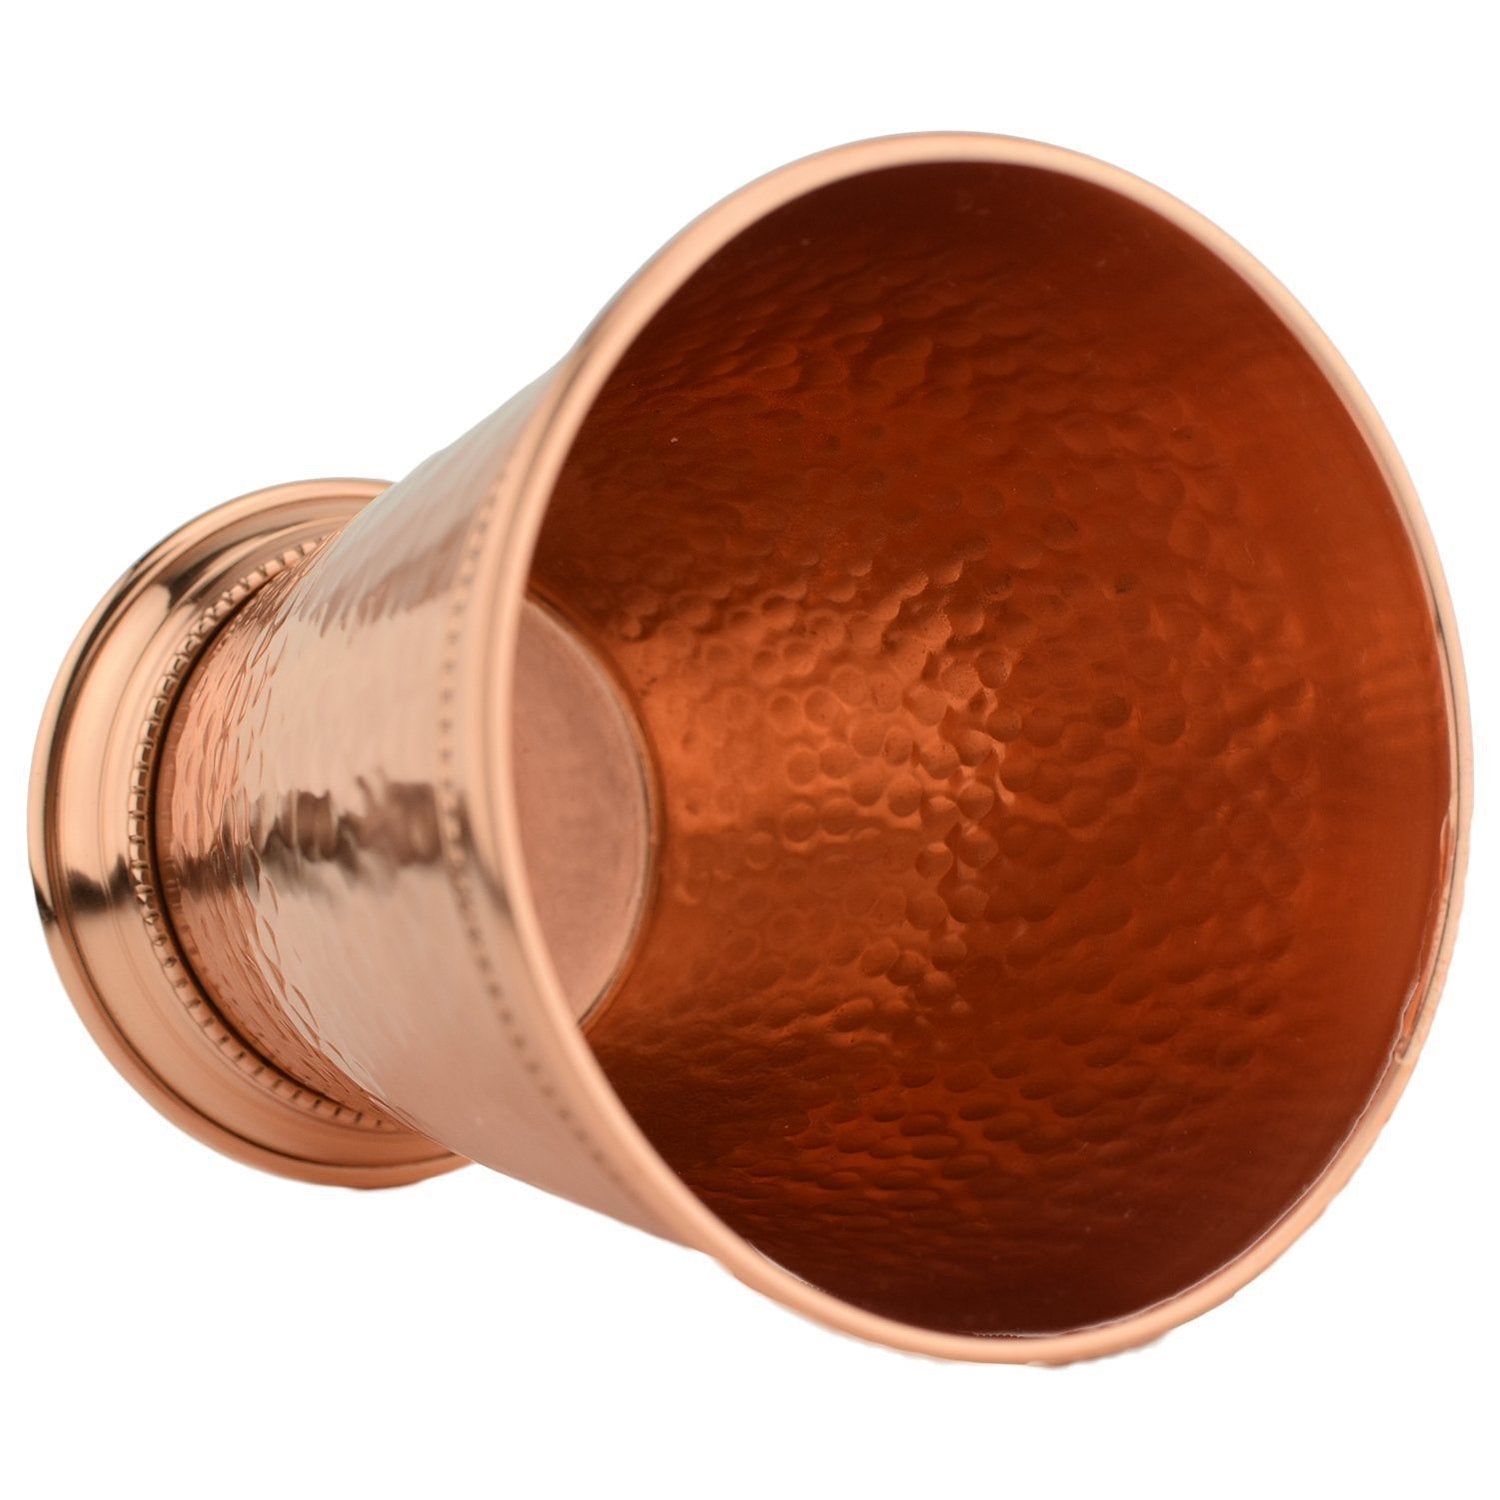 Prince of Scots 100% Pure Hammered Copper Mint Julep Cup-Mint Julep-Prince of Scots-810032751562-MintJulepCH-Prince of Scots